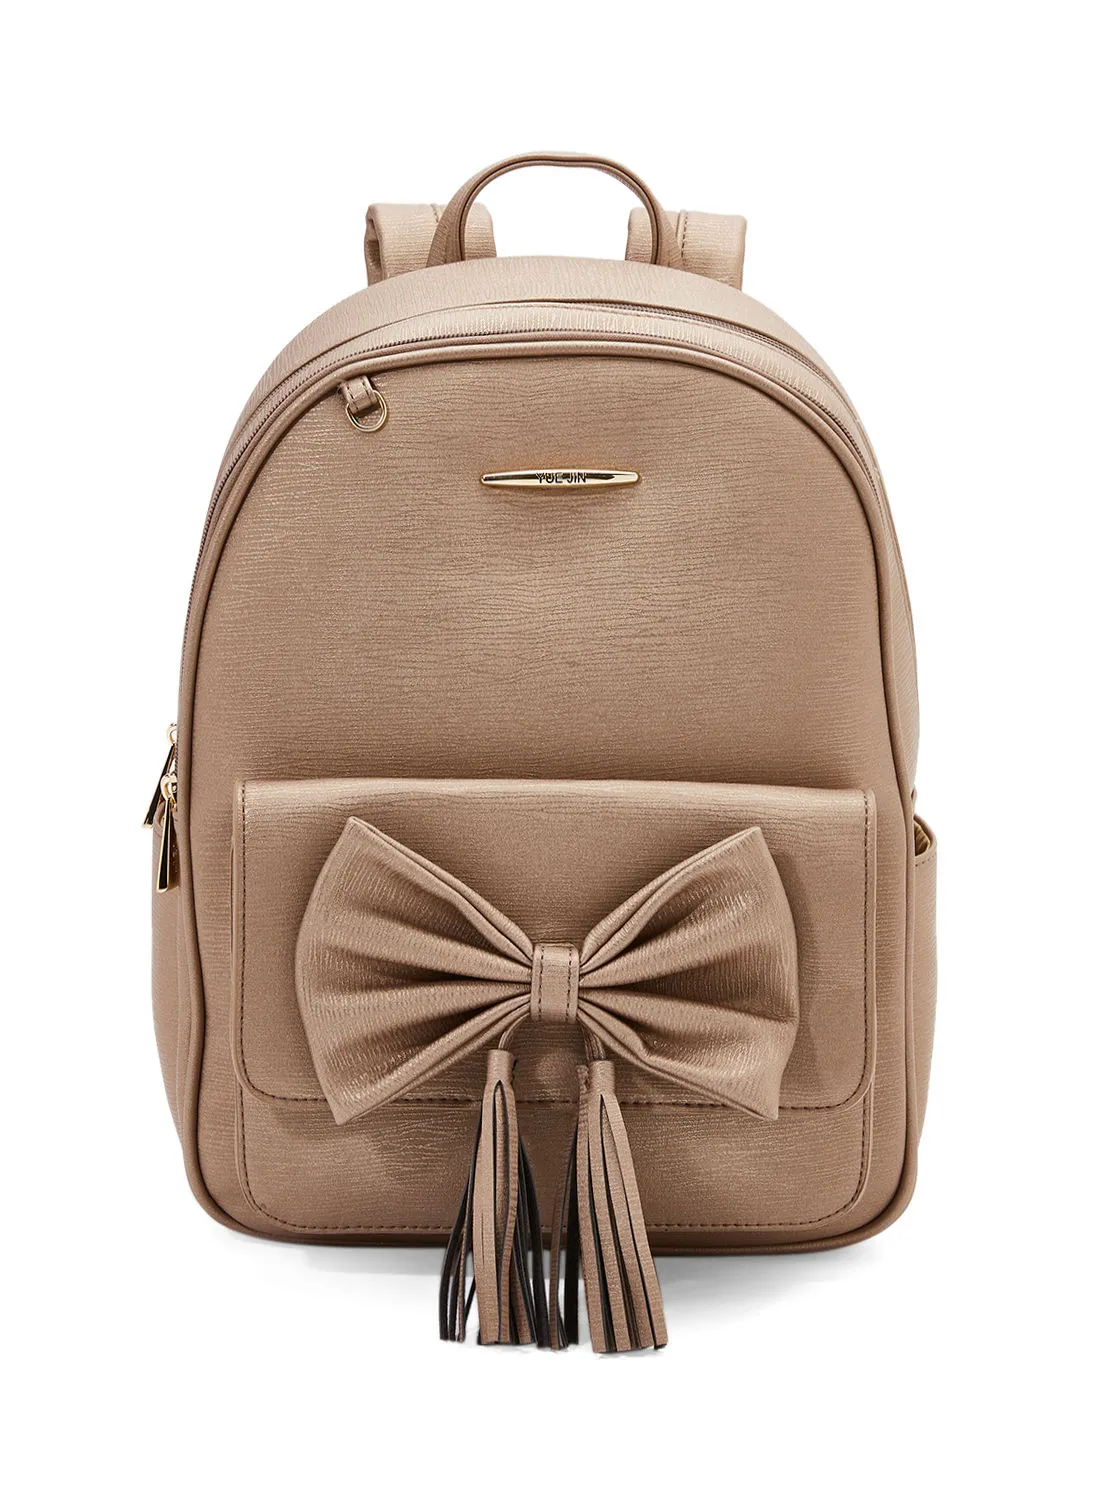 YUEJIN Faux Leather Backpack Gold